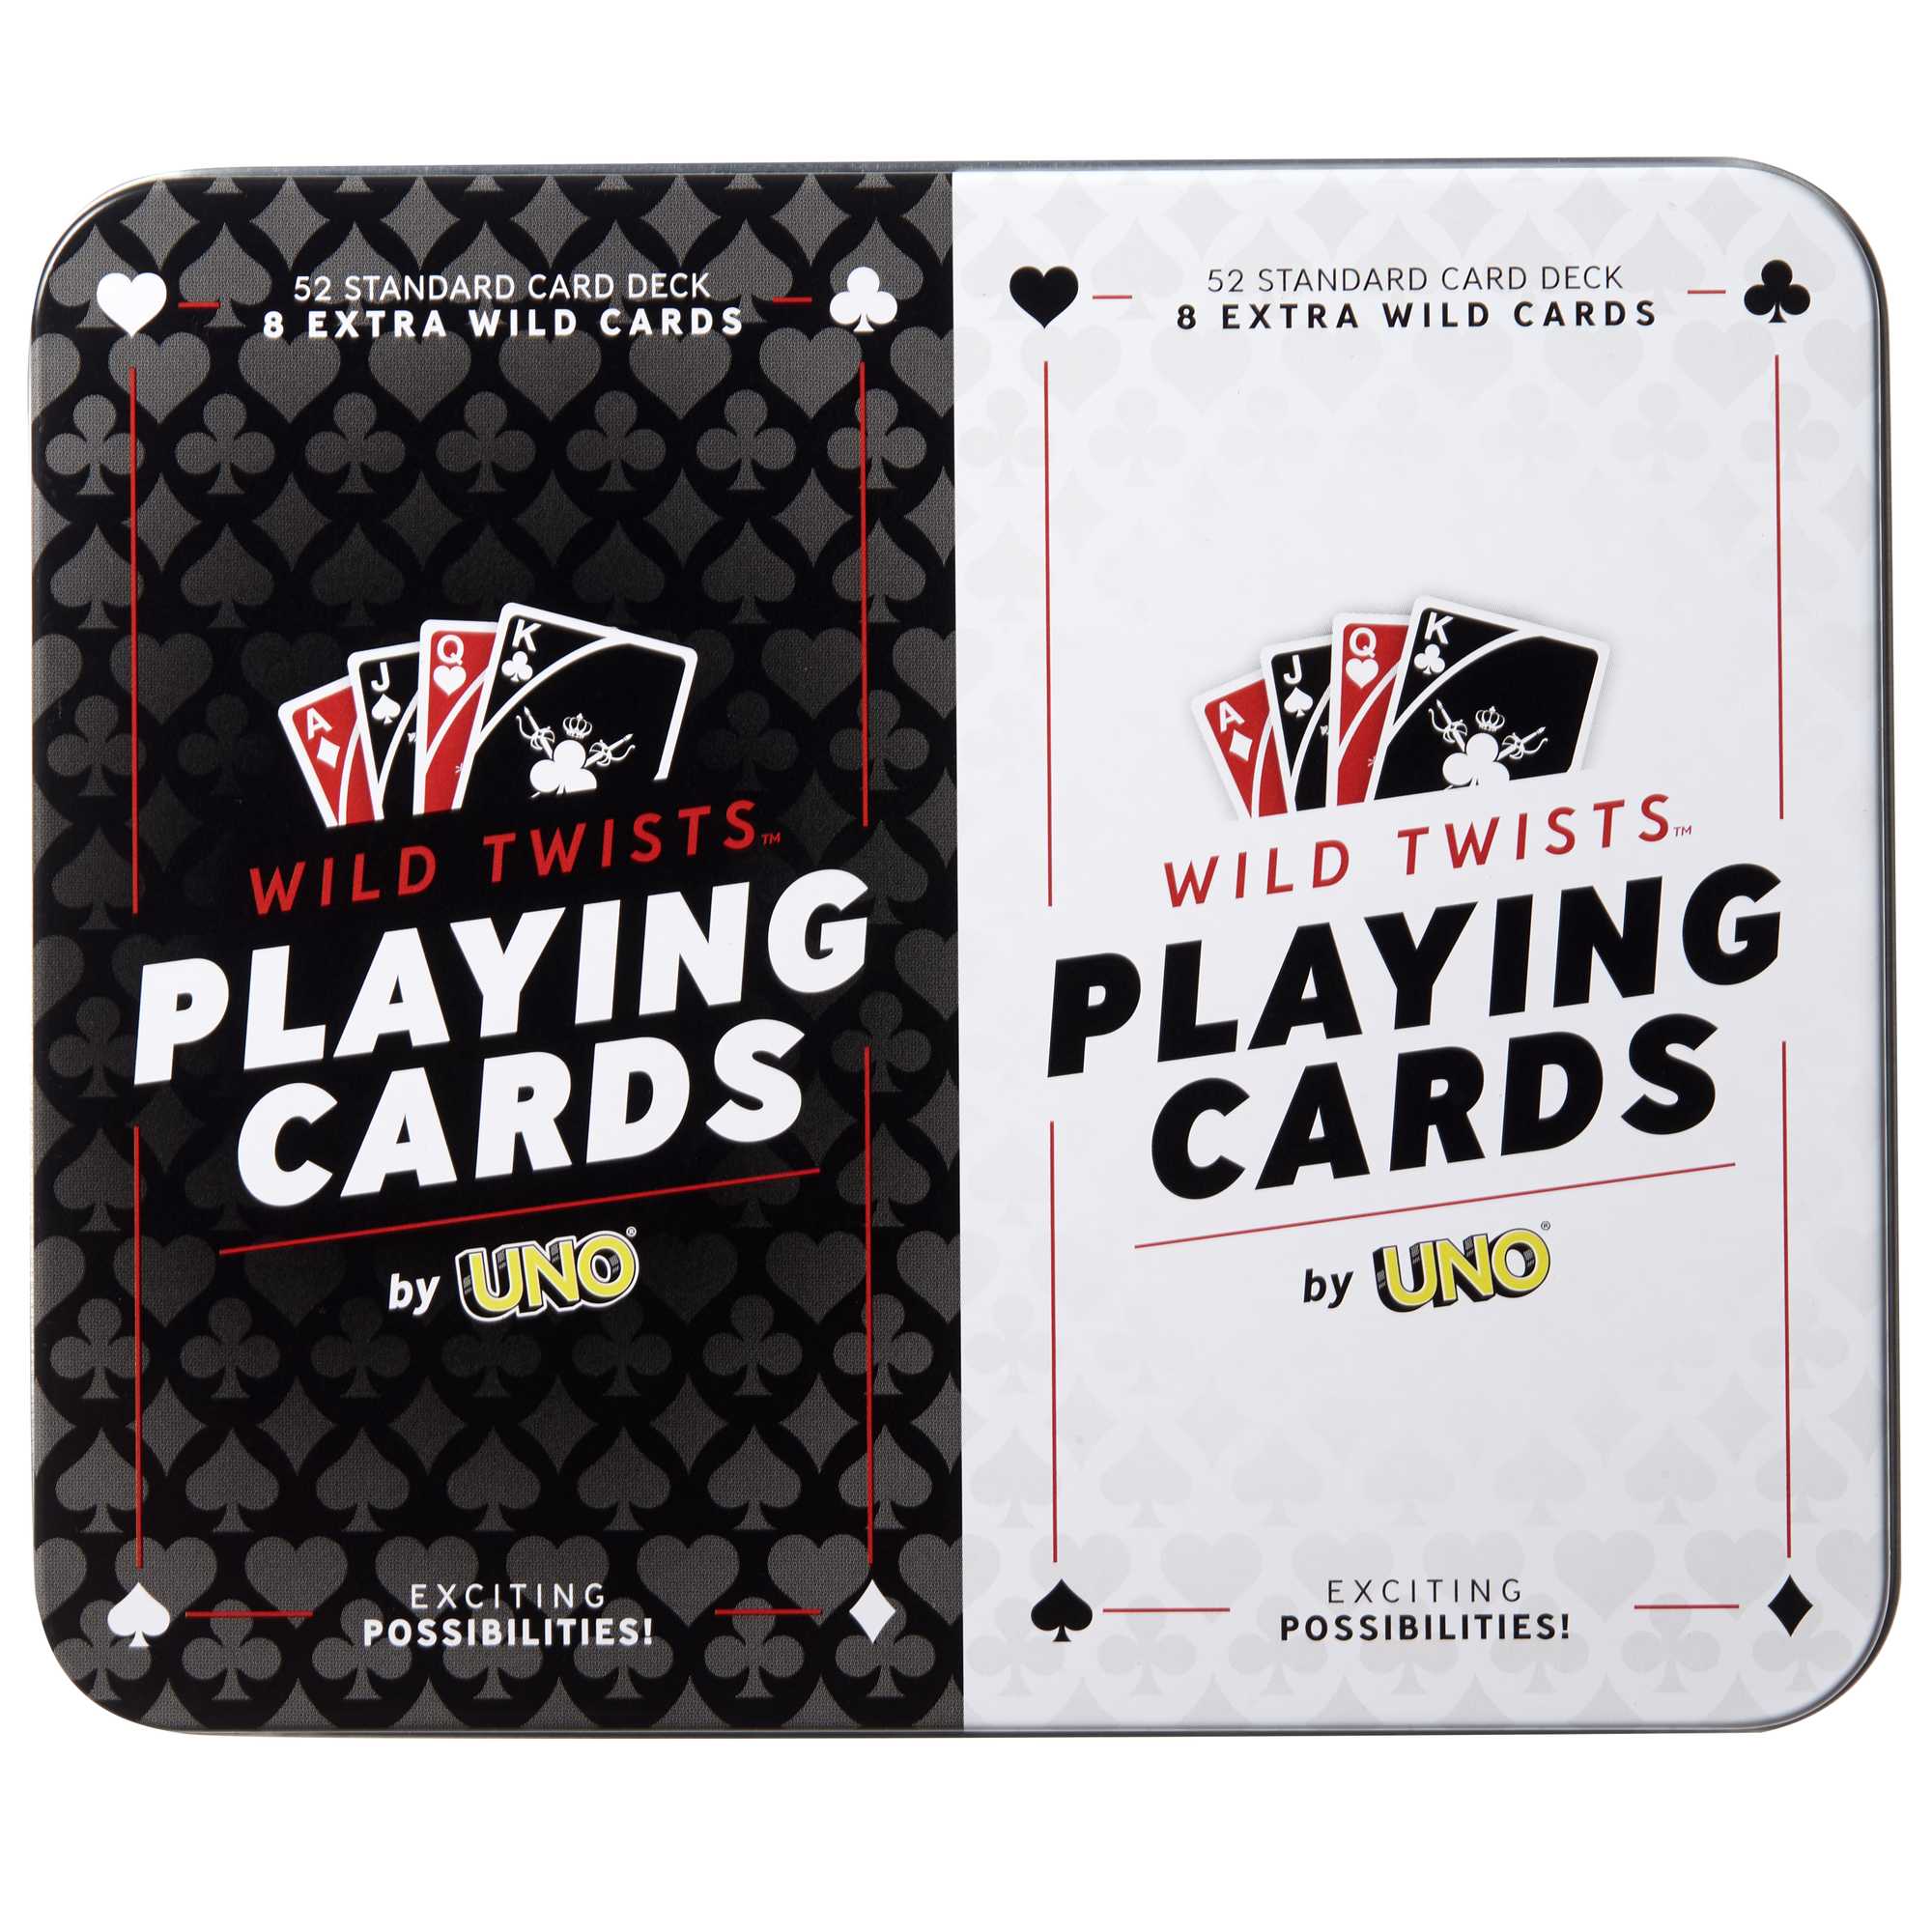 Mattel Games UNO All Wild Card Game with 112 Cards, Toy for Kid, Family &  Adult Game Night for Players 7 Years & Older ( Exclusive)